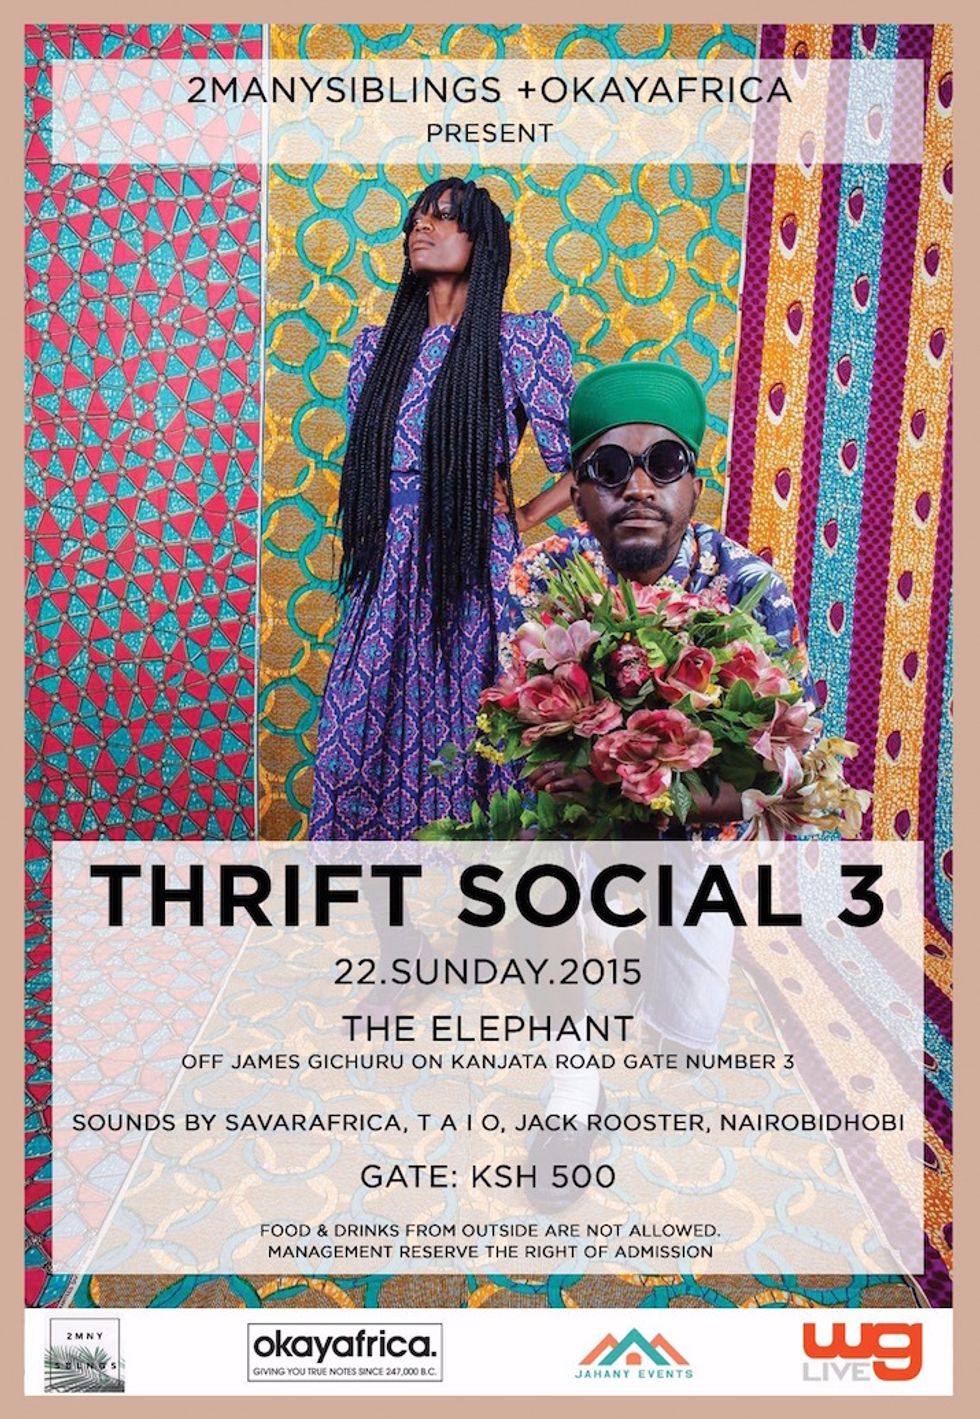 Okayafrica Is Teaming Up With 2manysiblings To Present 'Thrift Social,' A Unique Style Event In Nairobi